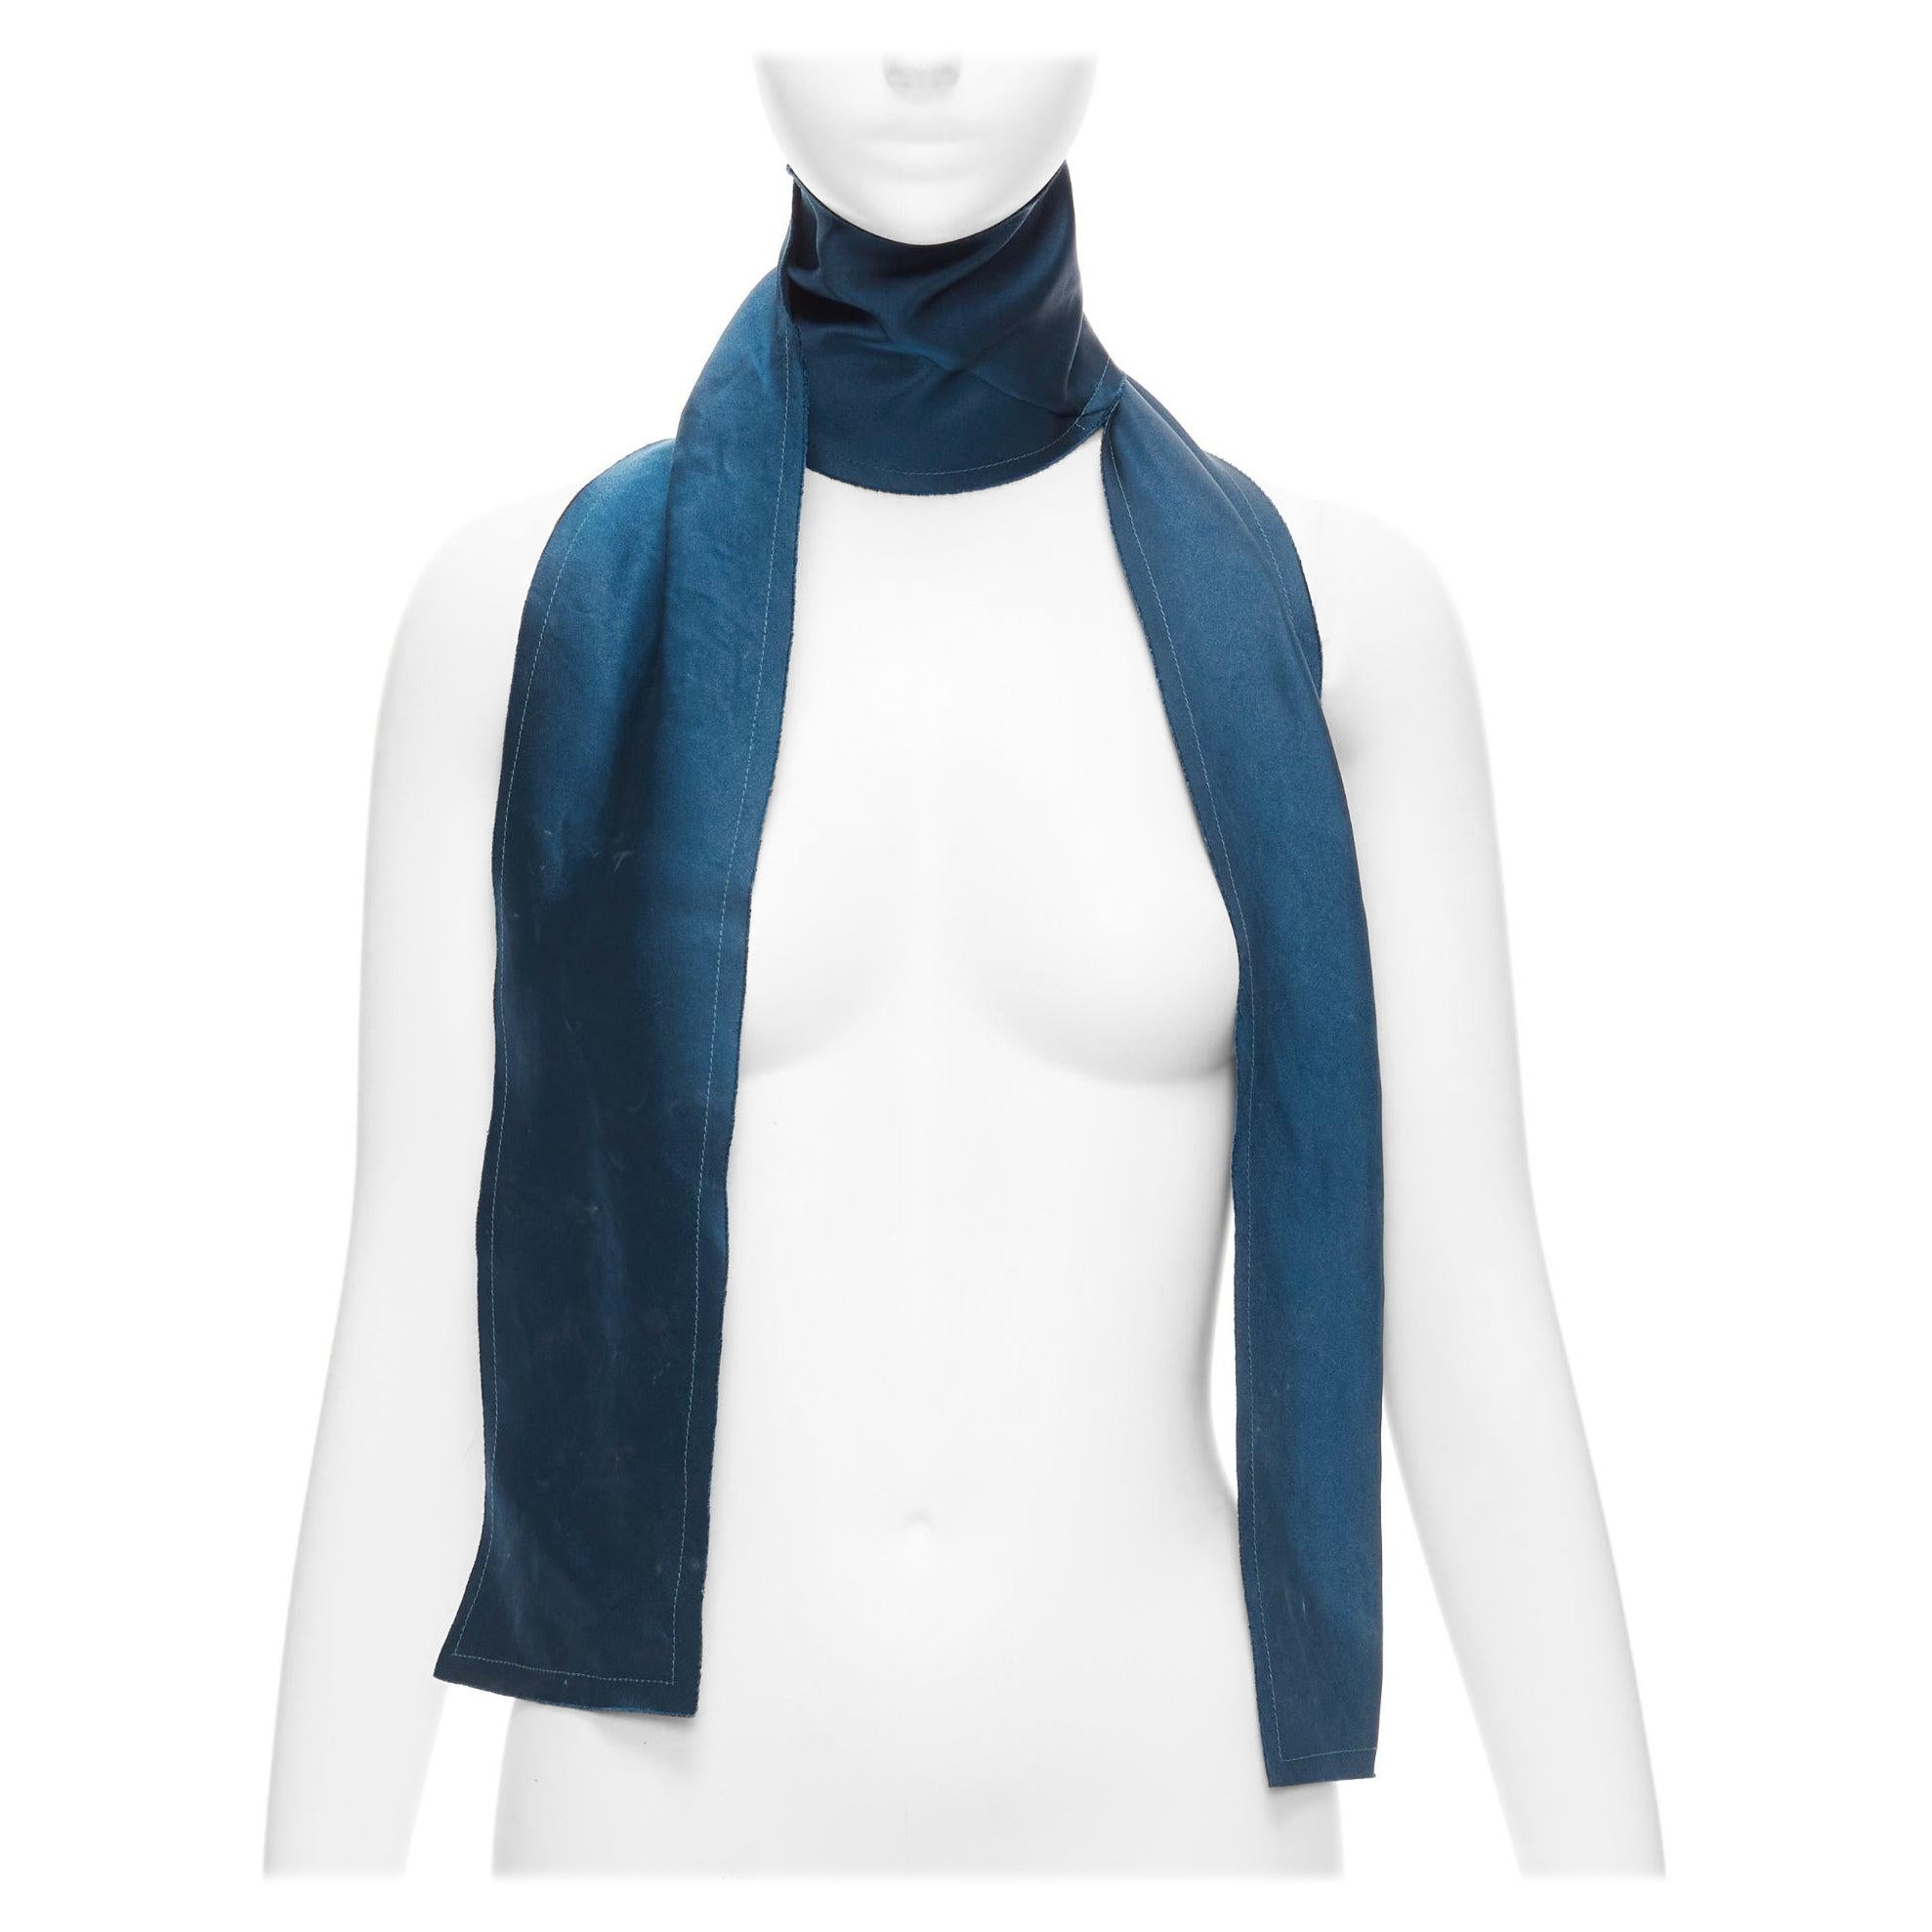 LANVIN teal blue 100% silk made in france frayed edge rectangular scarf For Sale